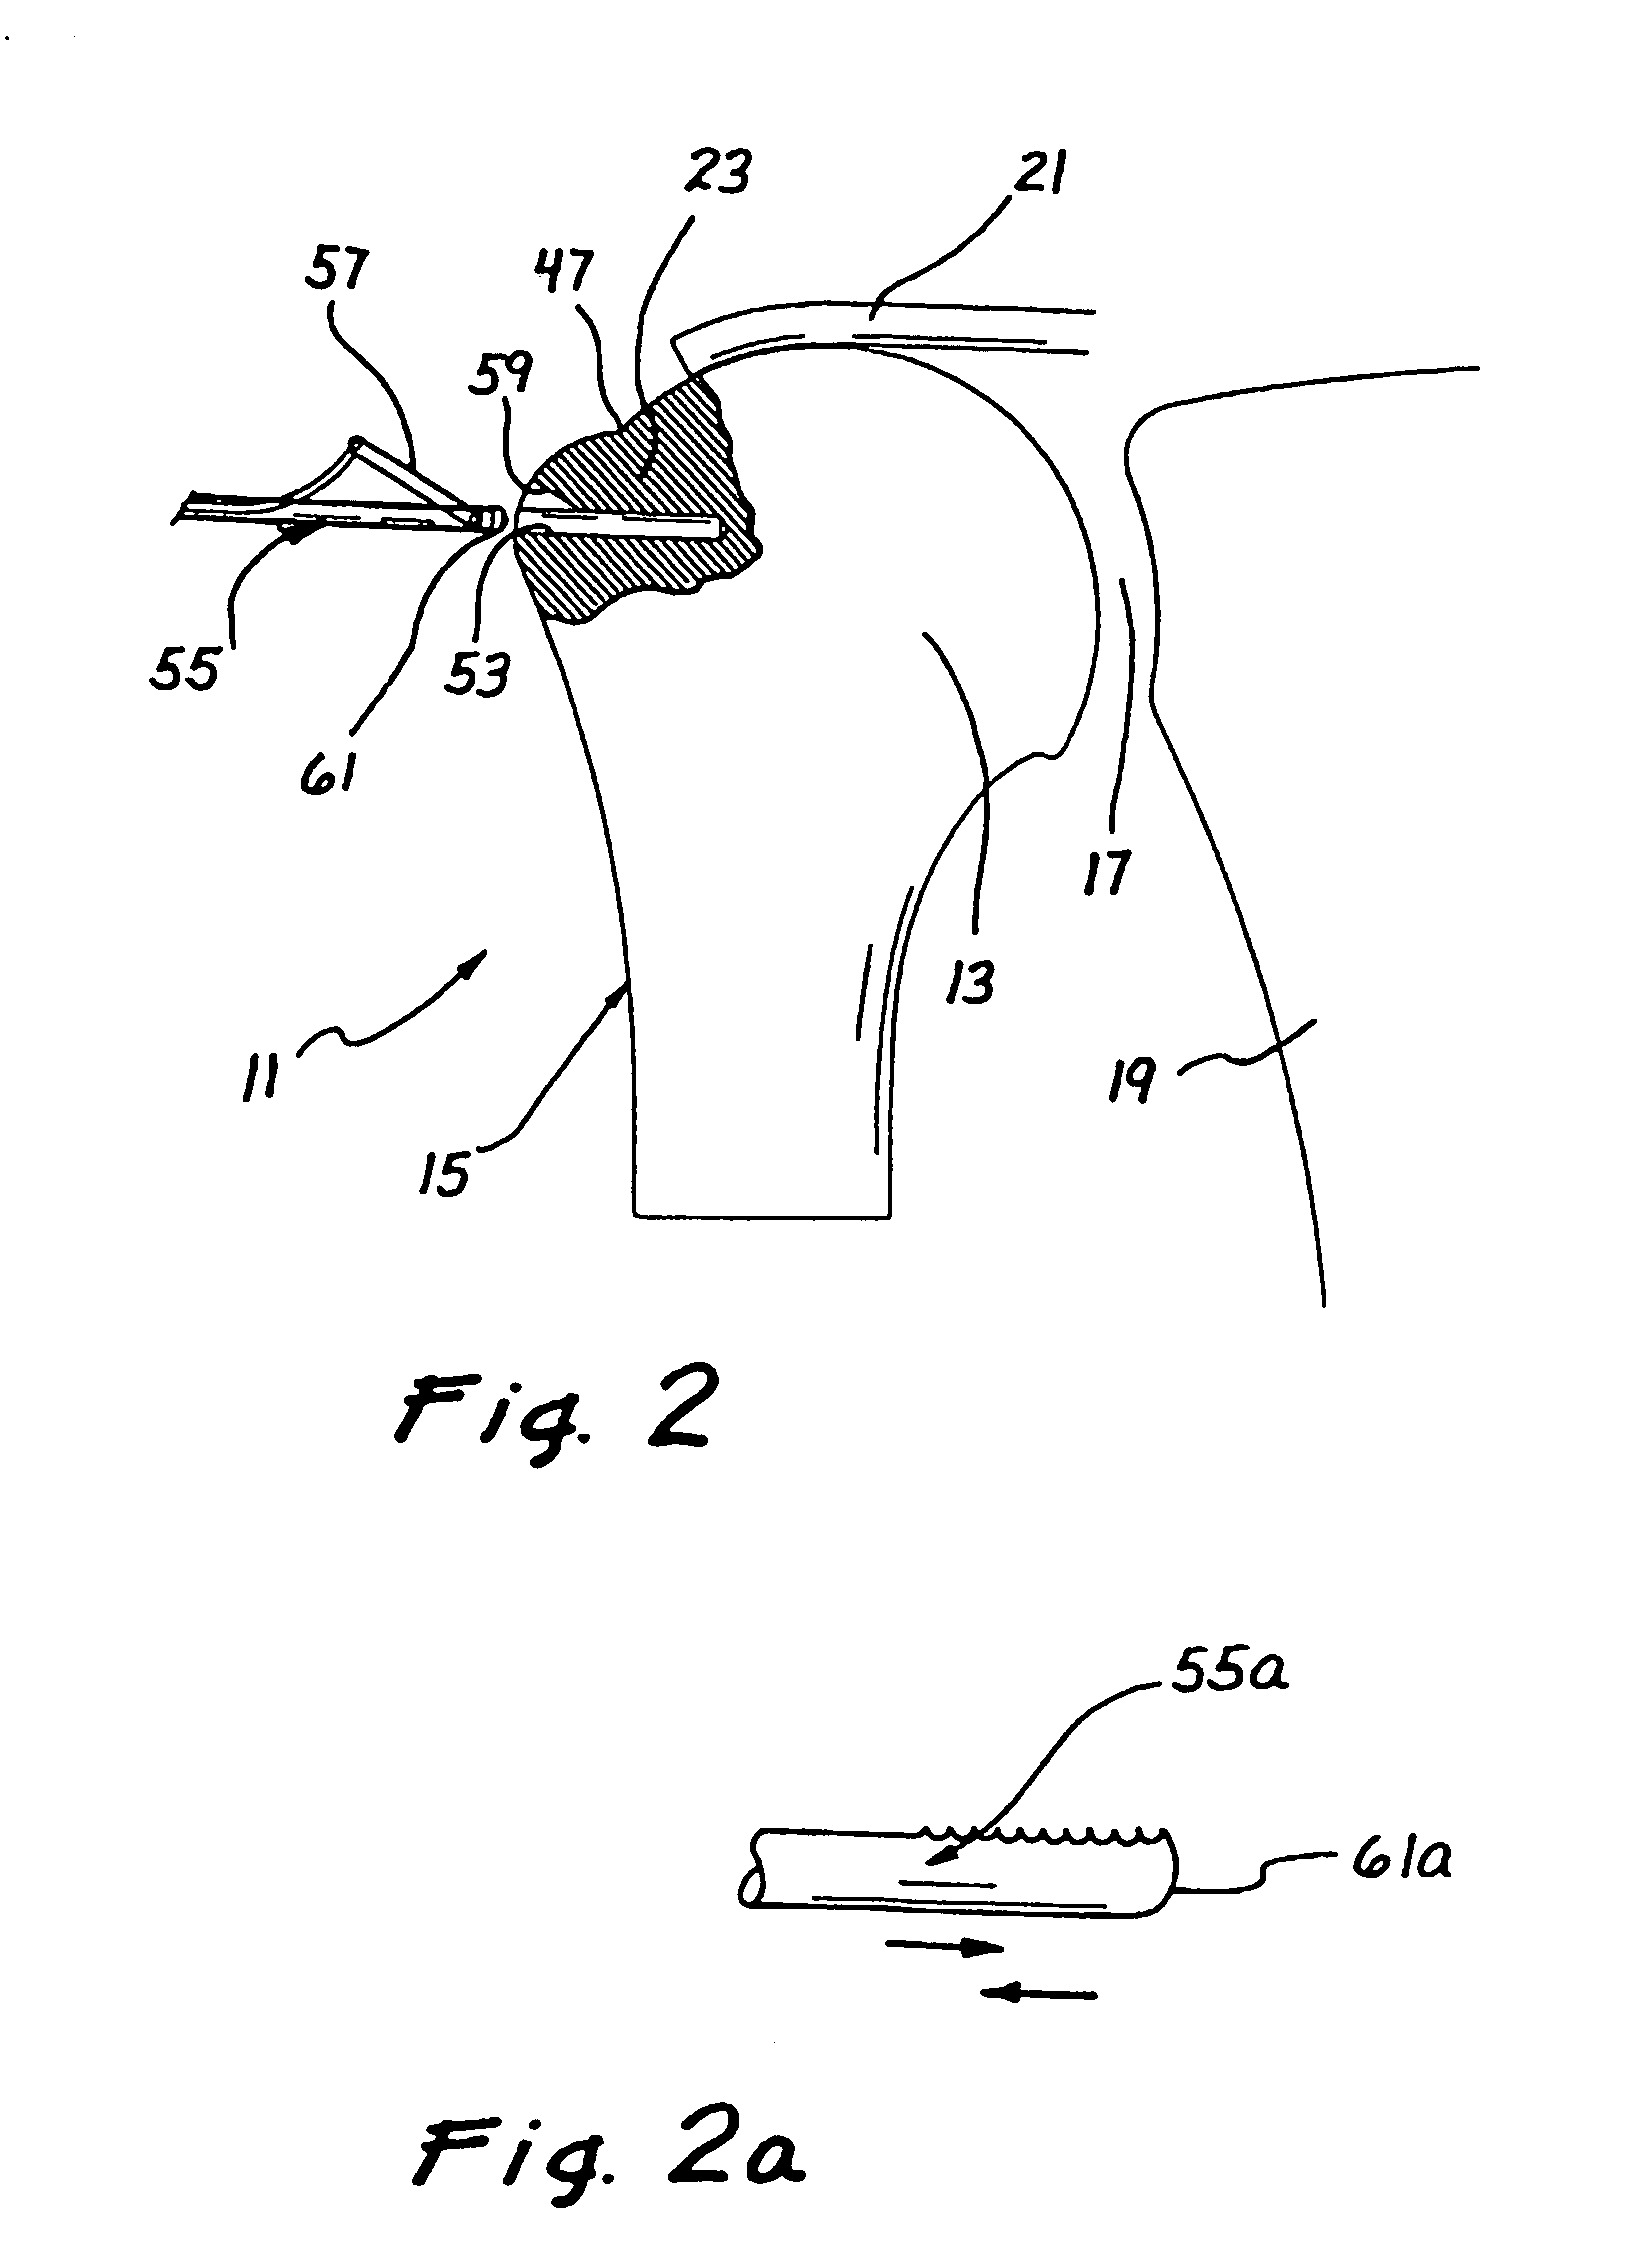 Methods for attaching connective tissues to bone using a multi-component bone anchor